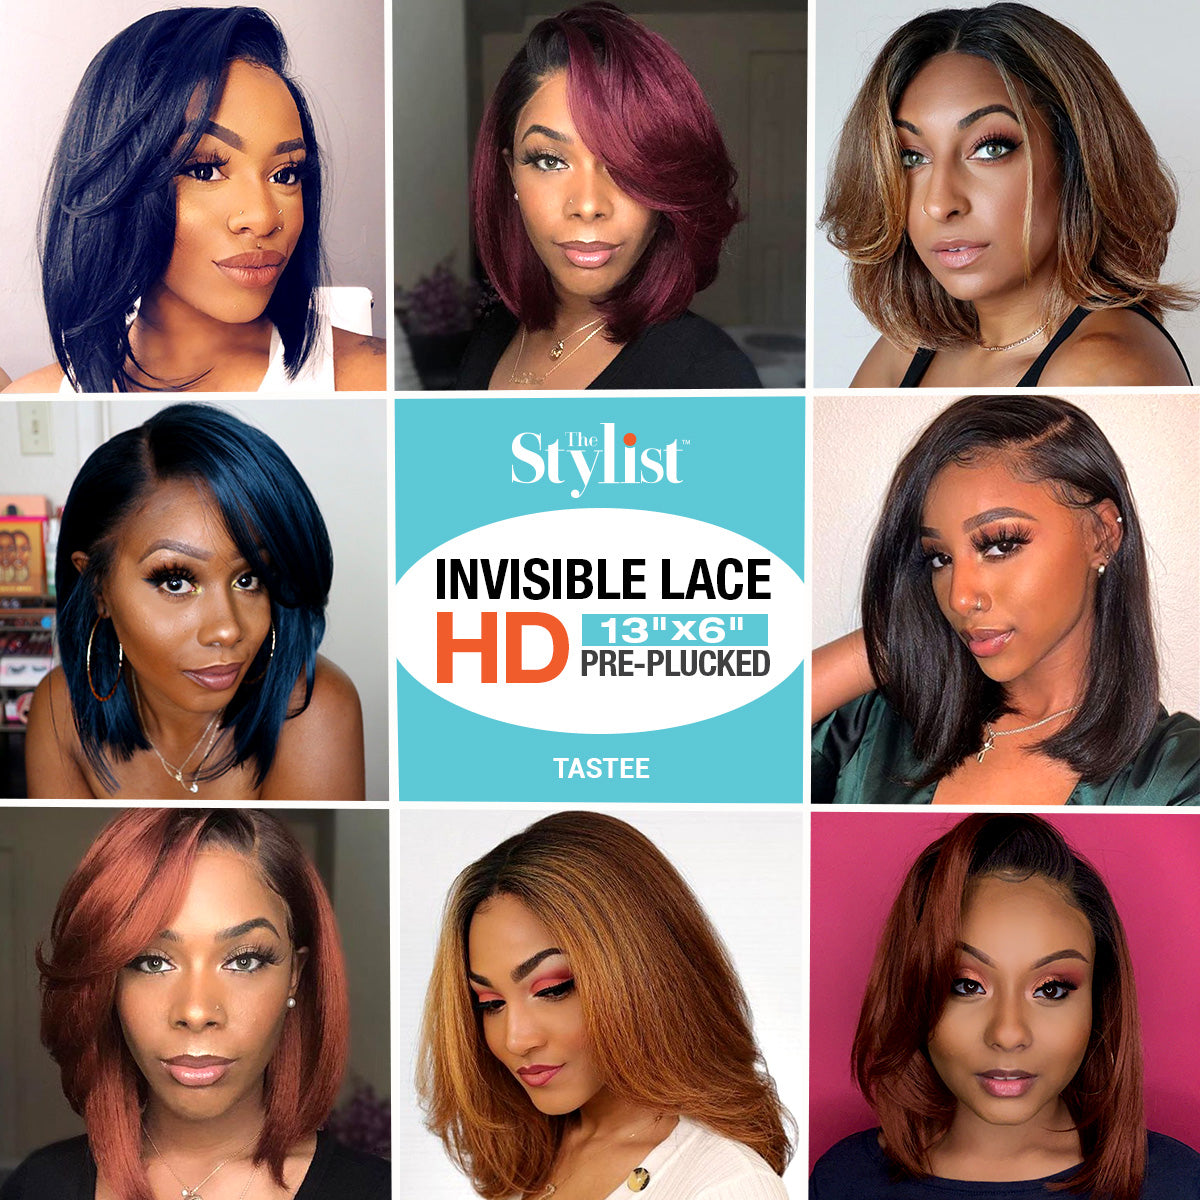 Multi-Parting, 13X6, Human Hair Blend, Frontal Wig, Invisible Lace, Bob, Layered Bob, Feathered Bob, Pre-Plucked, Yaki Textured, Shoulder-Length Bob